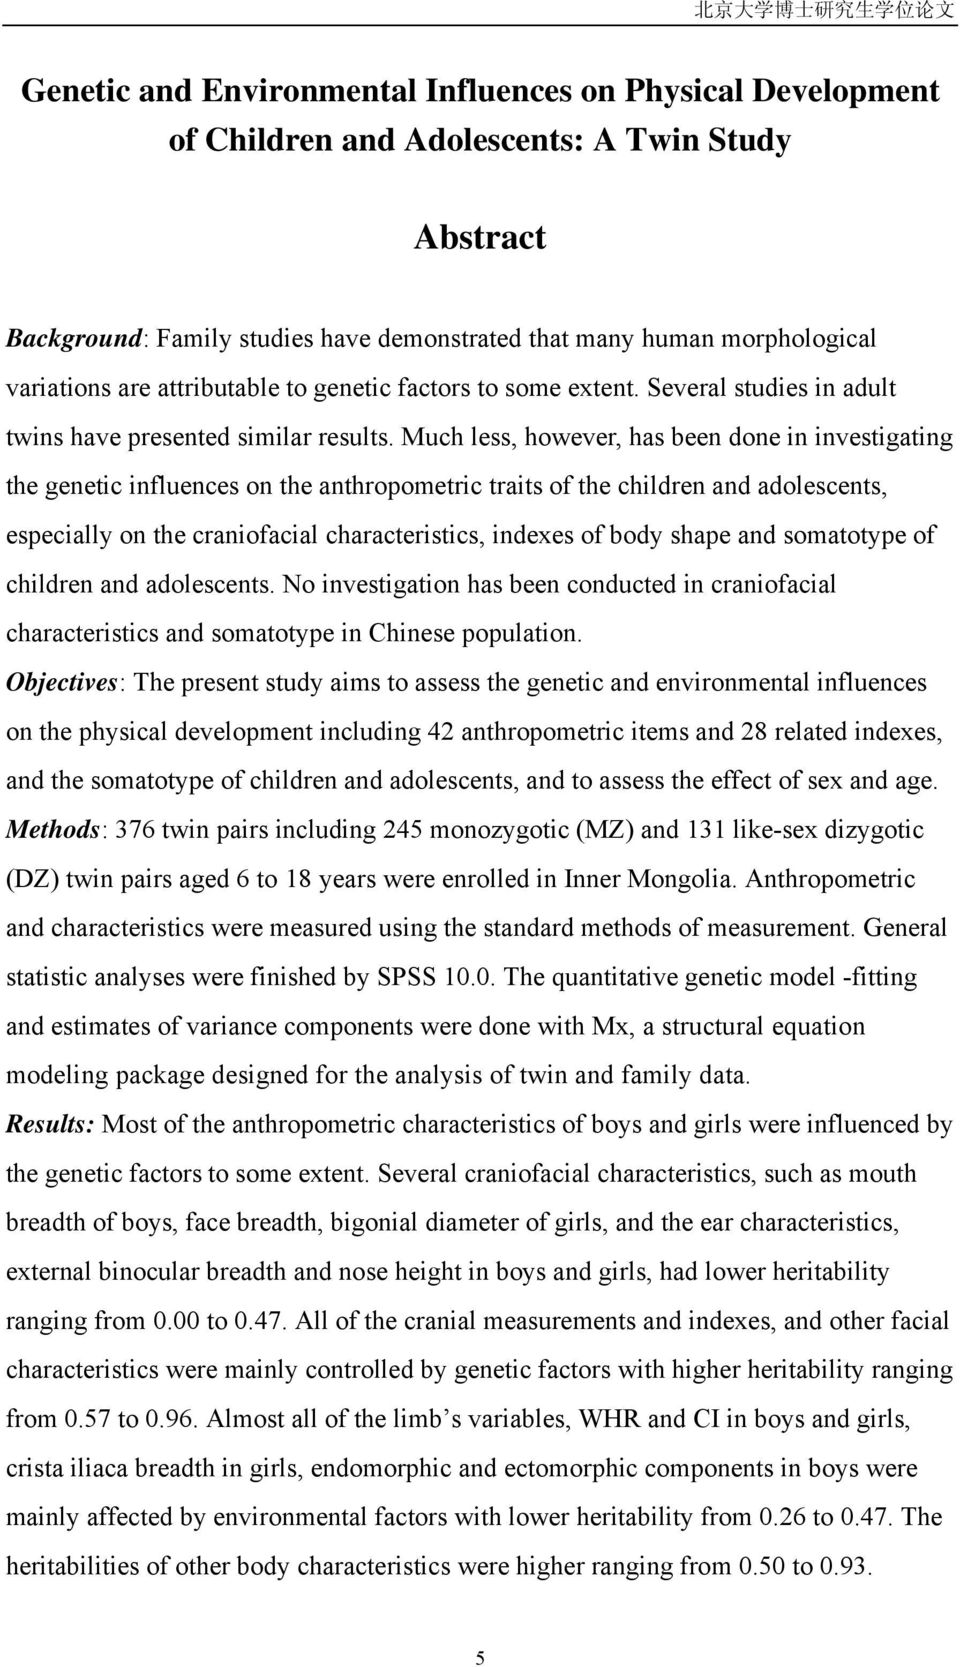 Much less, however, has been done in investigating the genetic influences on the anthropometric traits of the children and adolescents, especially on the craniofacial characteristics, indexes of body